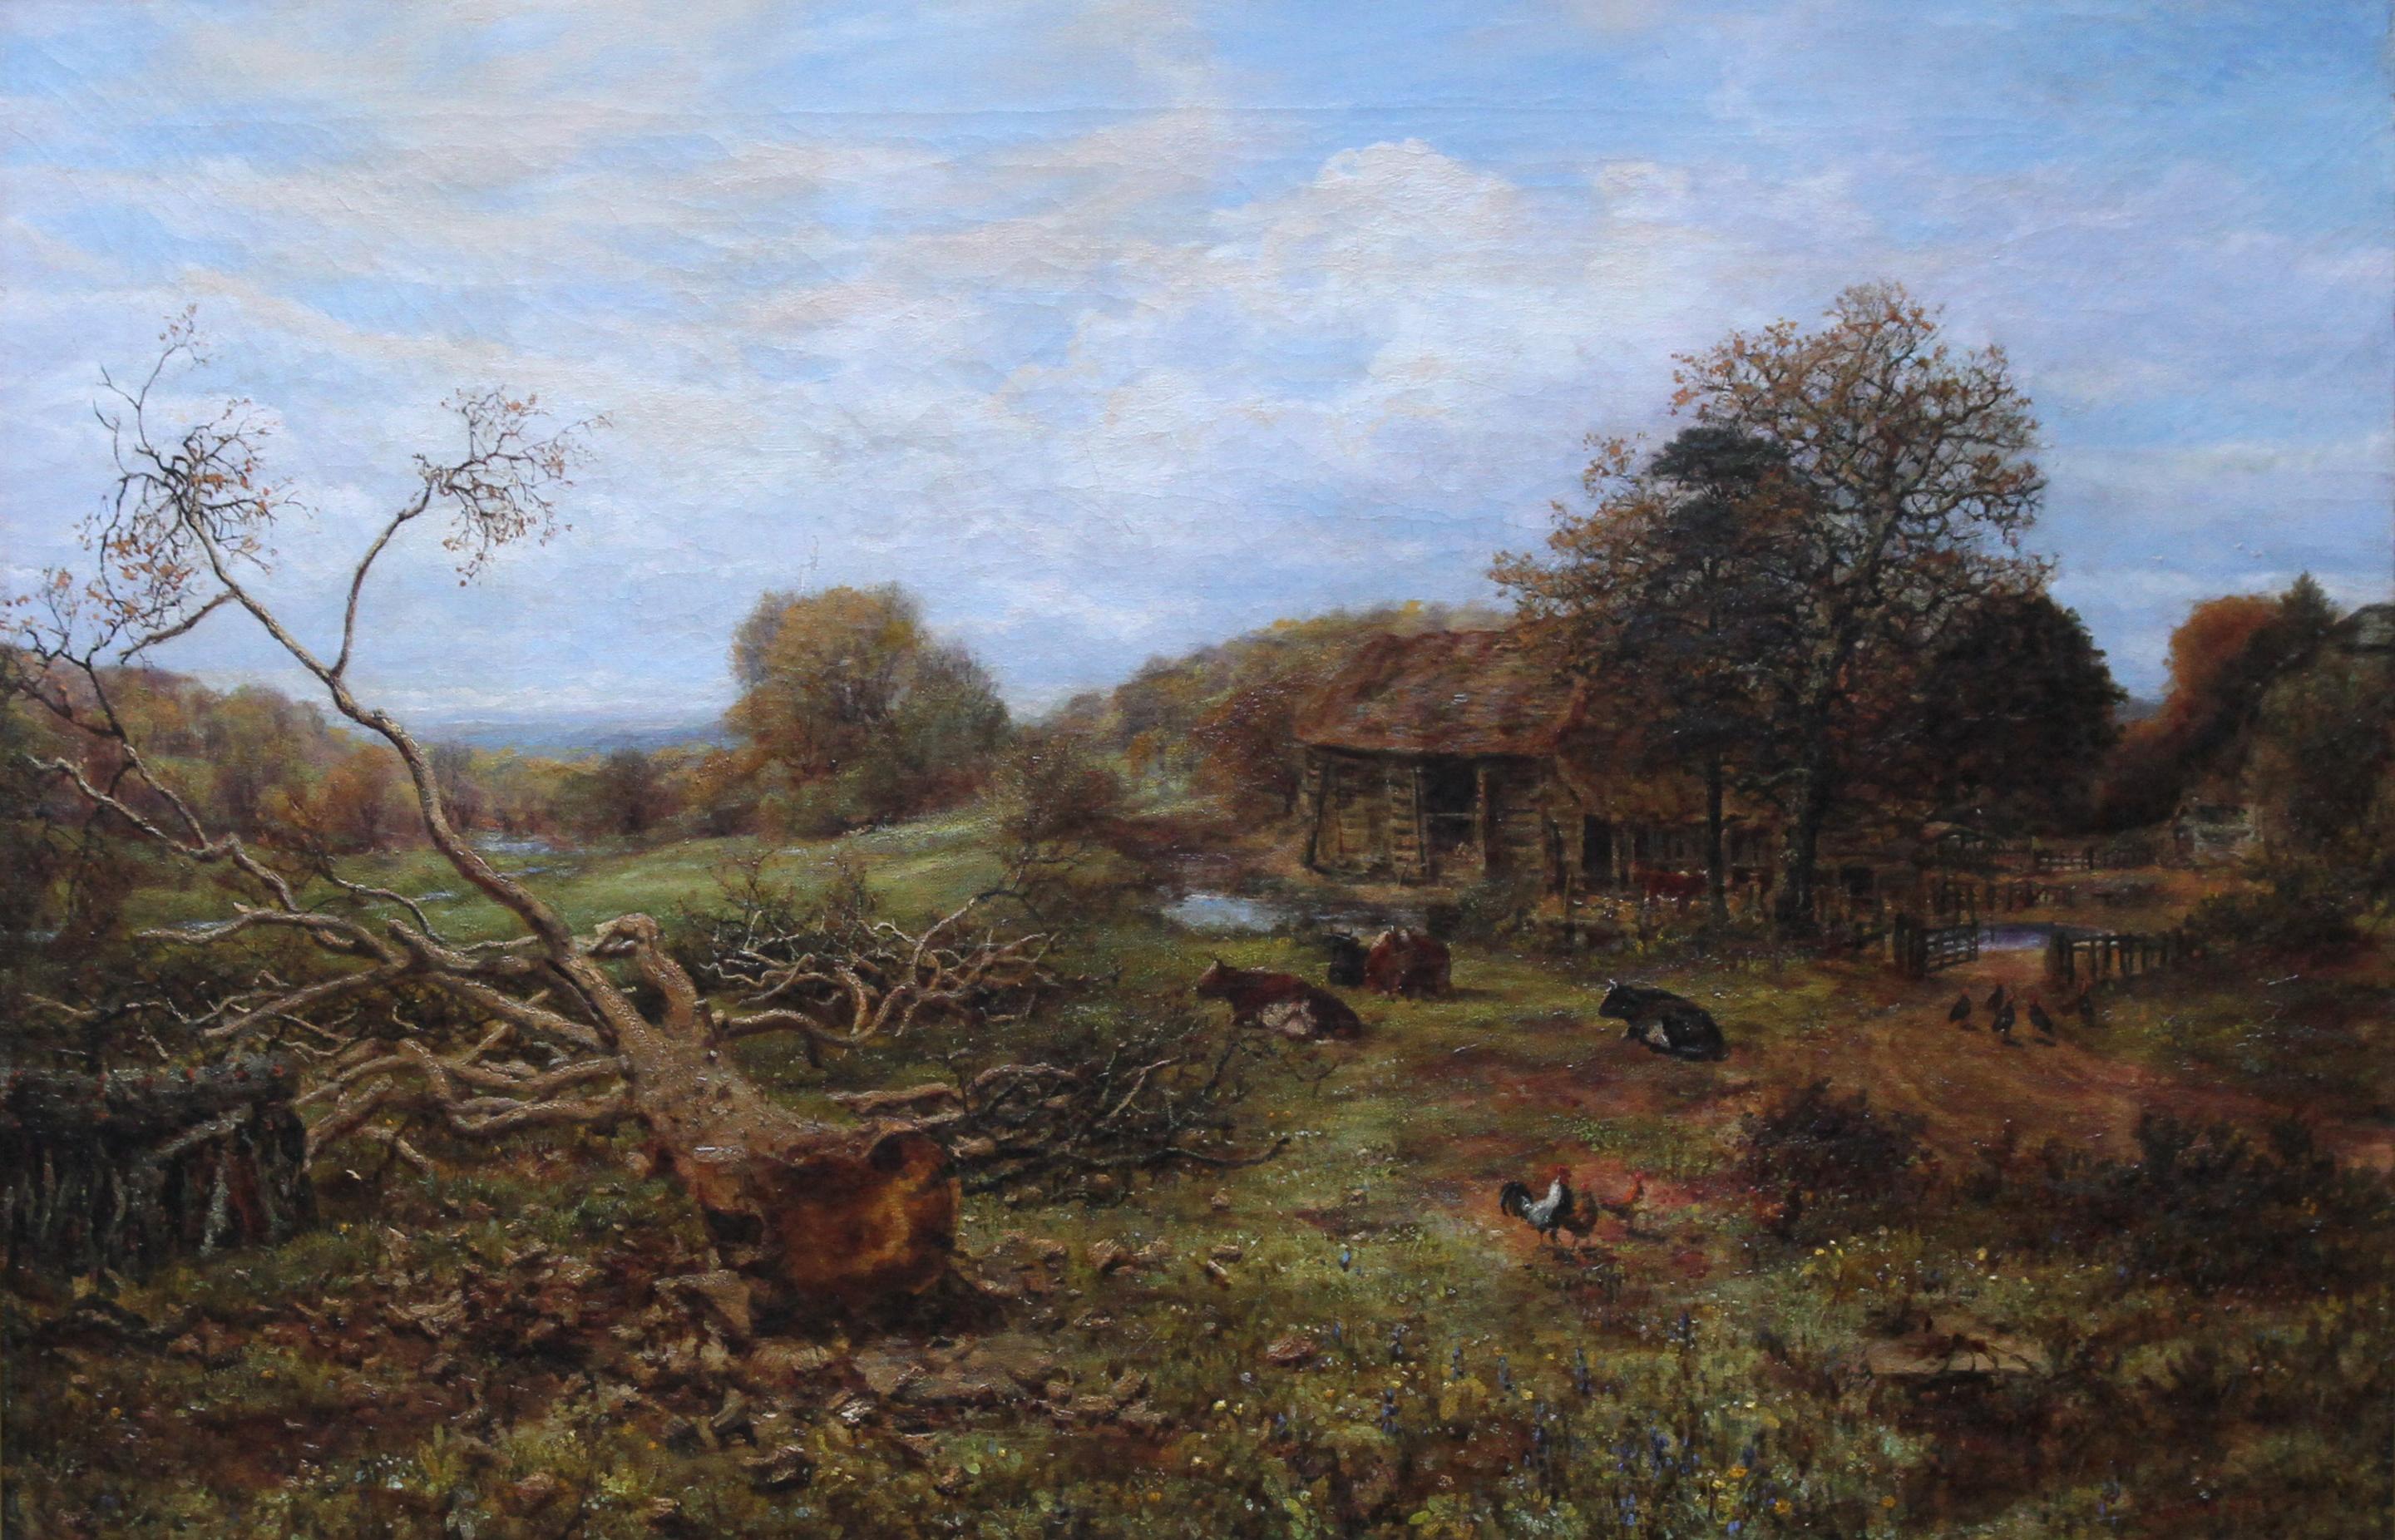 Landscape with Cattle - Surrey - British Victorian art 19th century oil painting - Painting by George William Mote